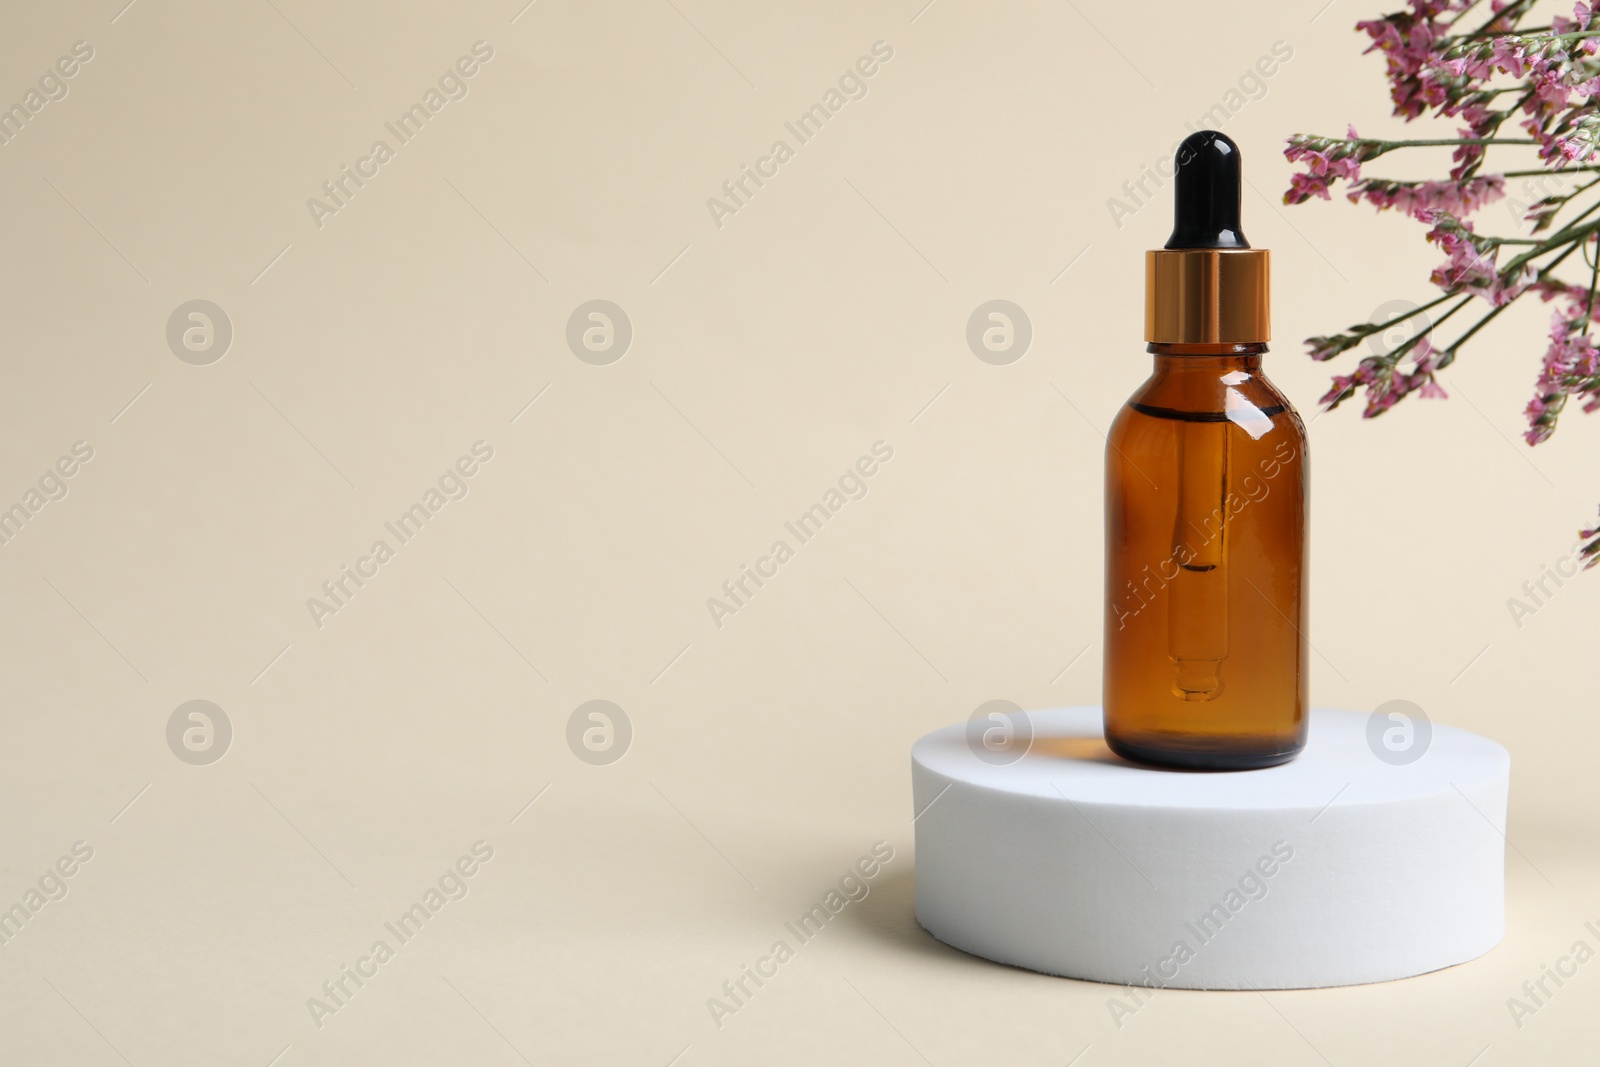 Photo of Bottle of cosmetic oil and flowers on beige background. Space for text